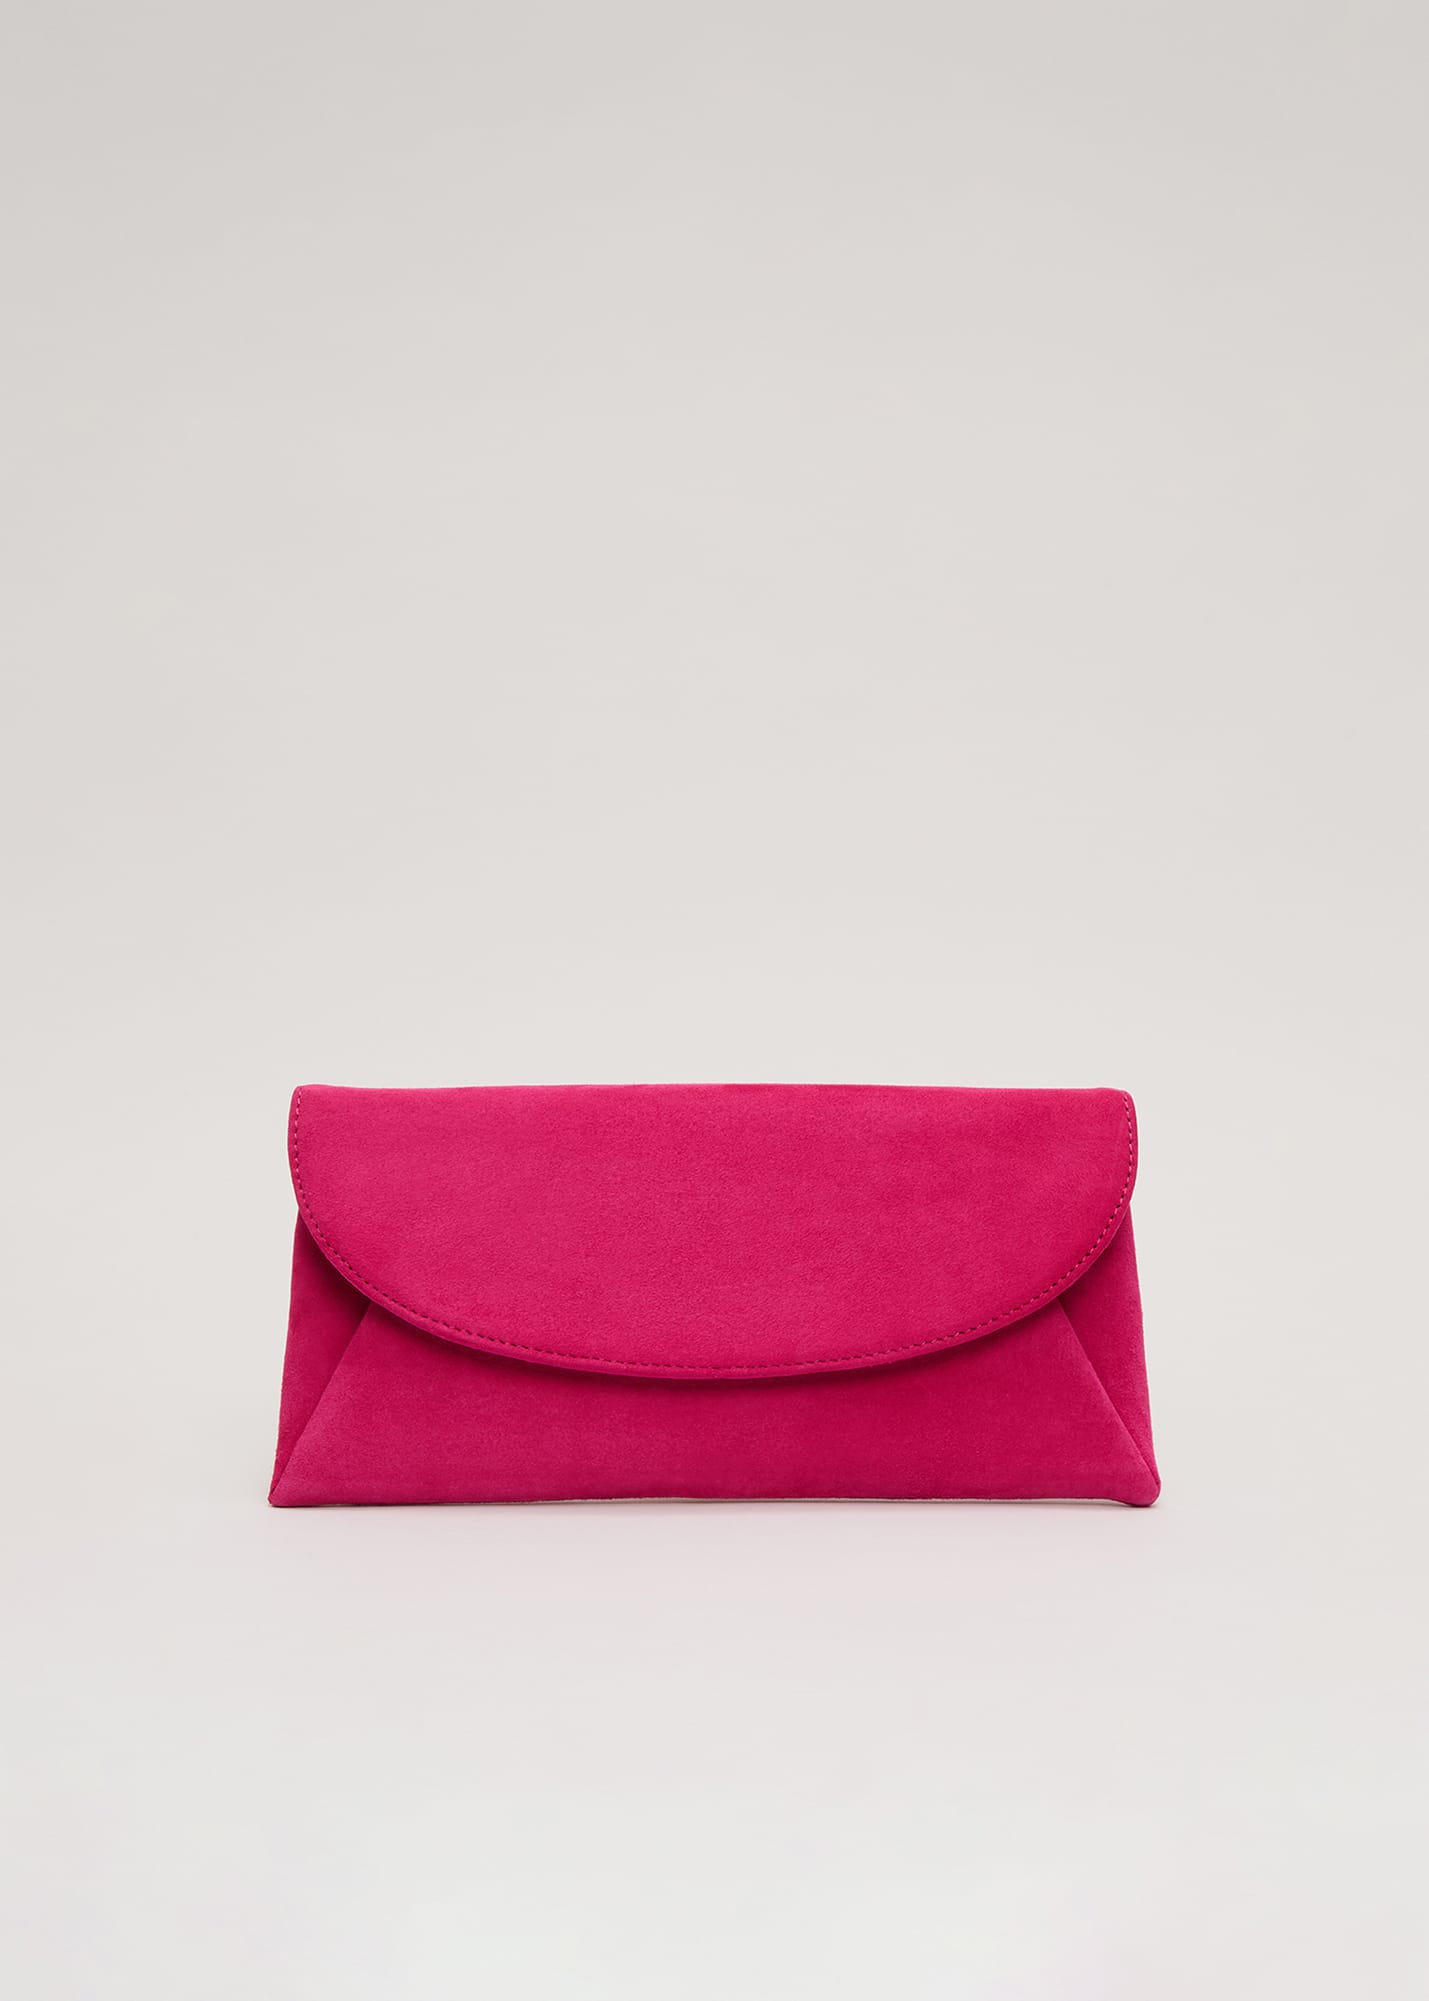 Phase Eight Women's Suede Clutch Bag